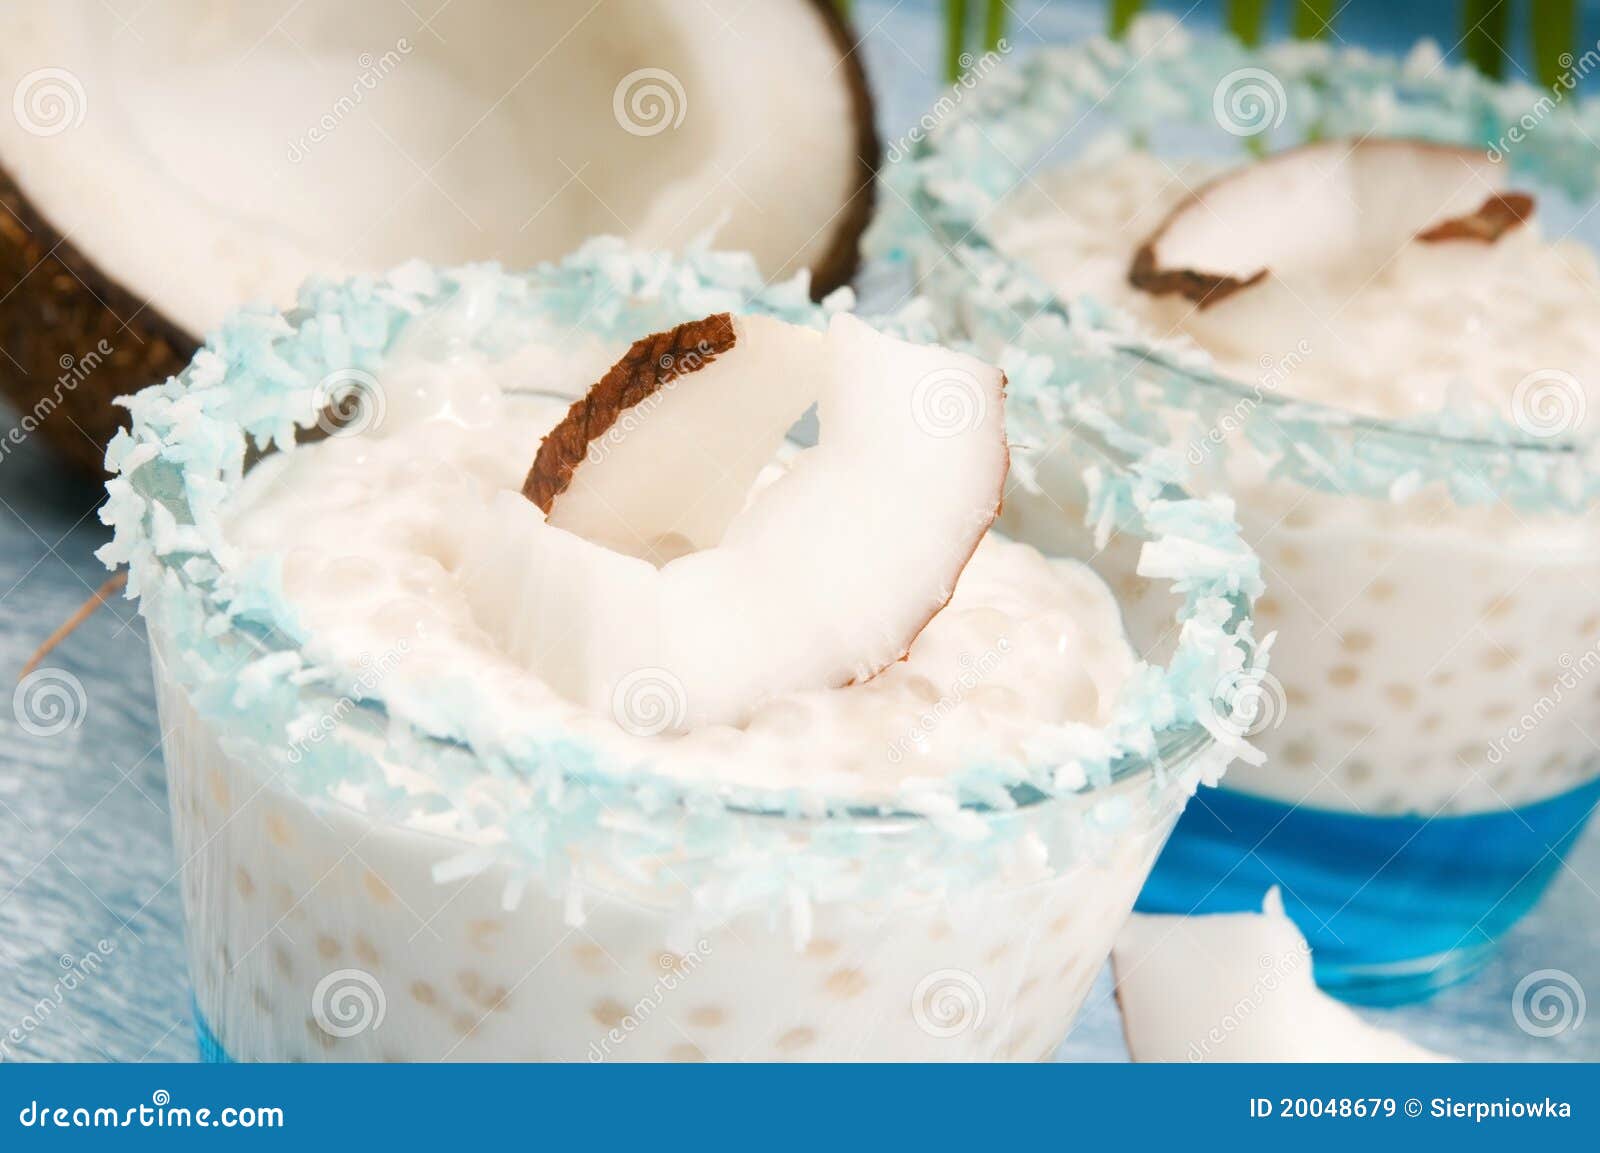 Coconut Pudding with Tapioca and Litchi Jelly Stock Image - Image of ...